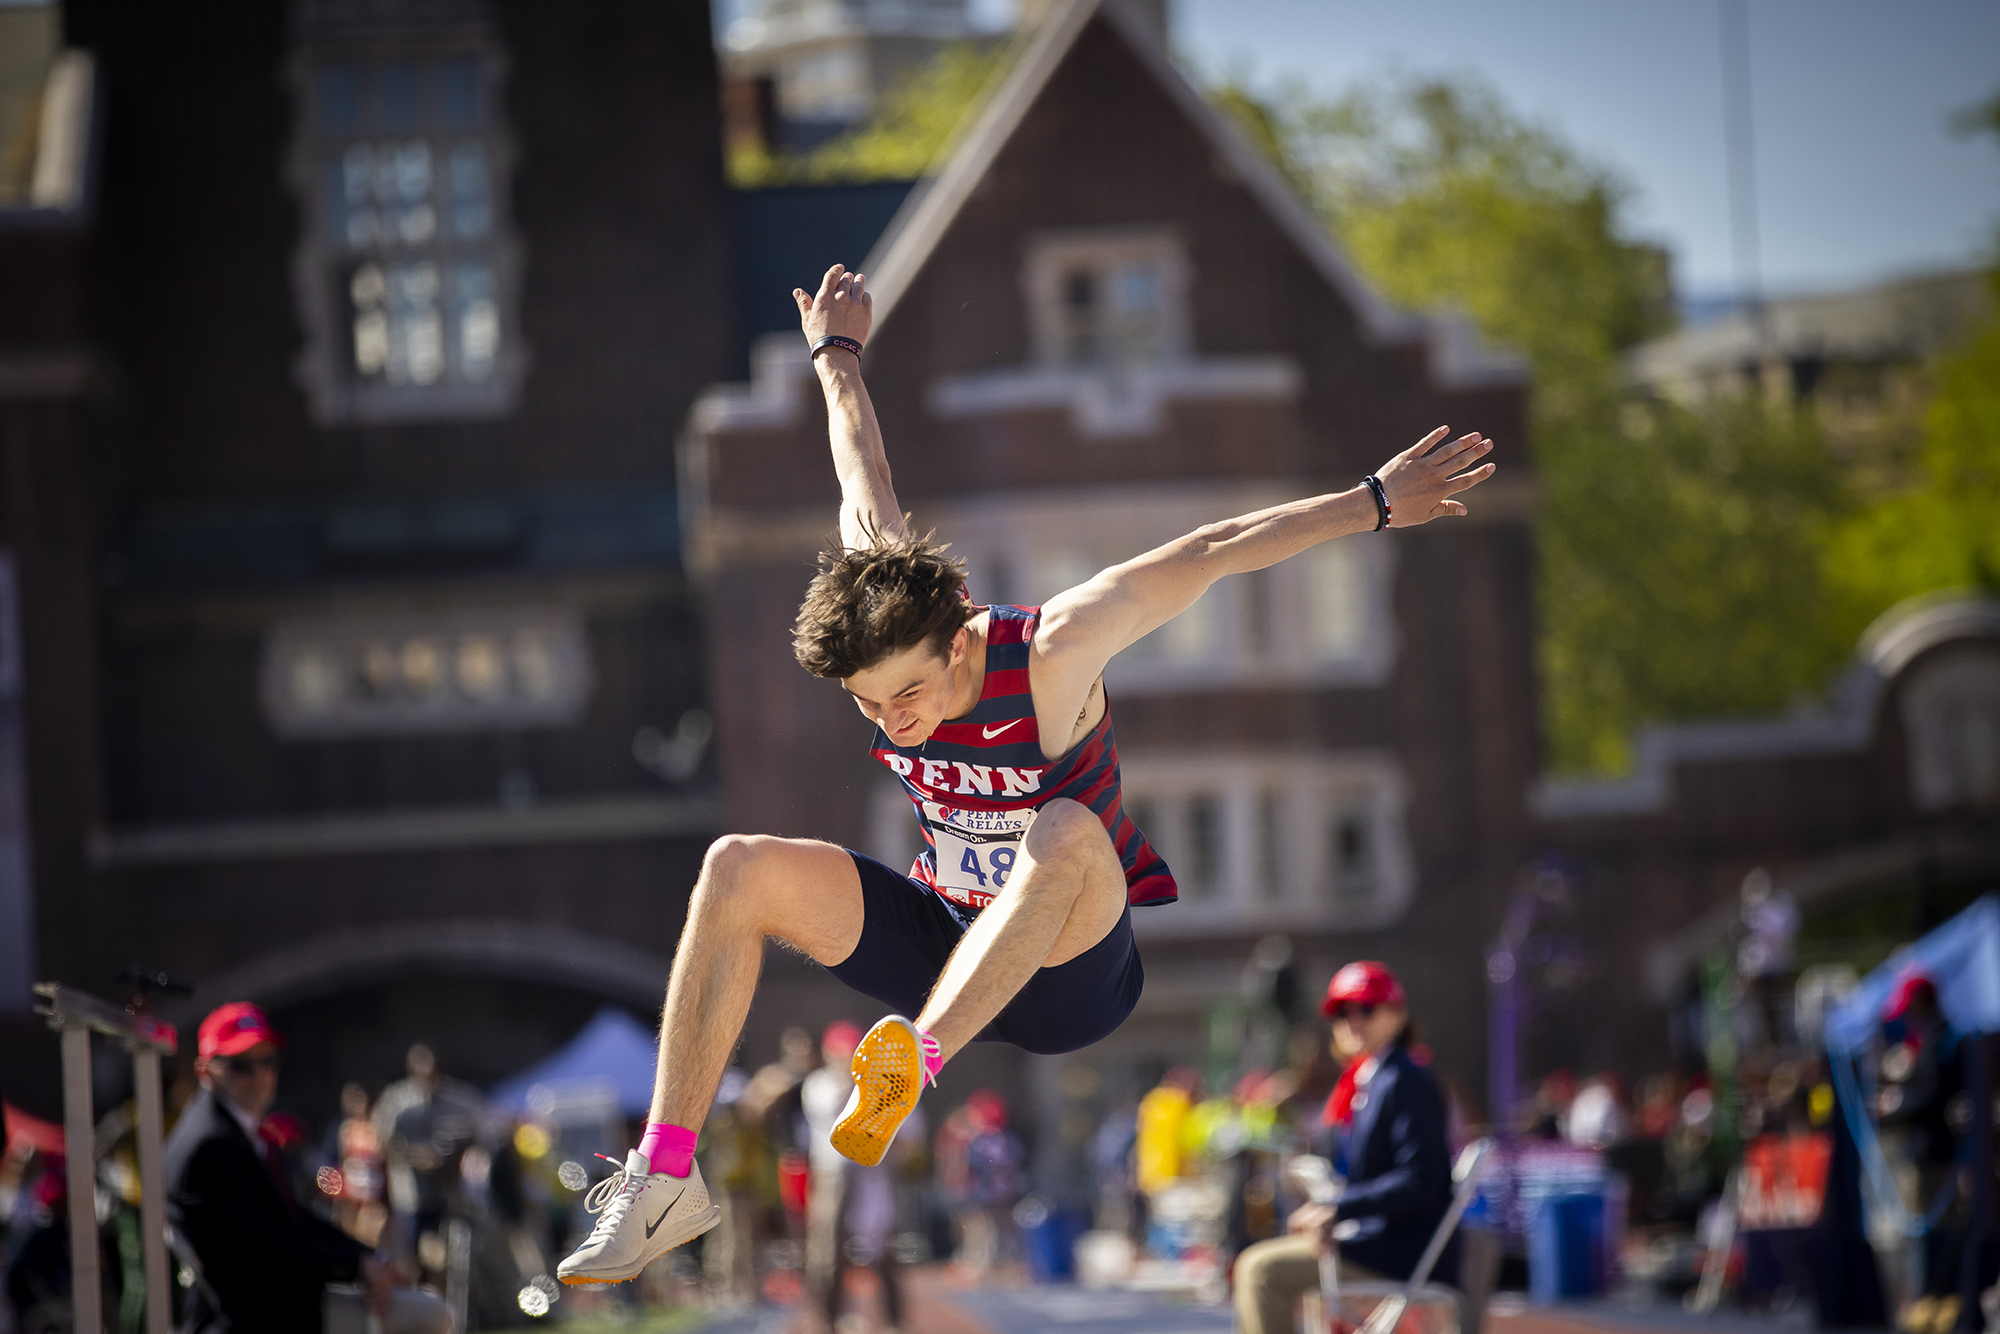 student athlete competes in the long jump during the penn relays